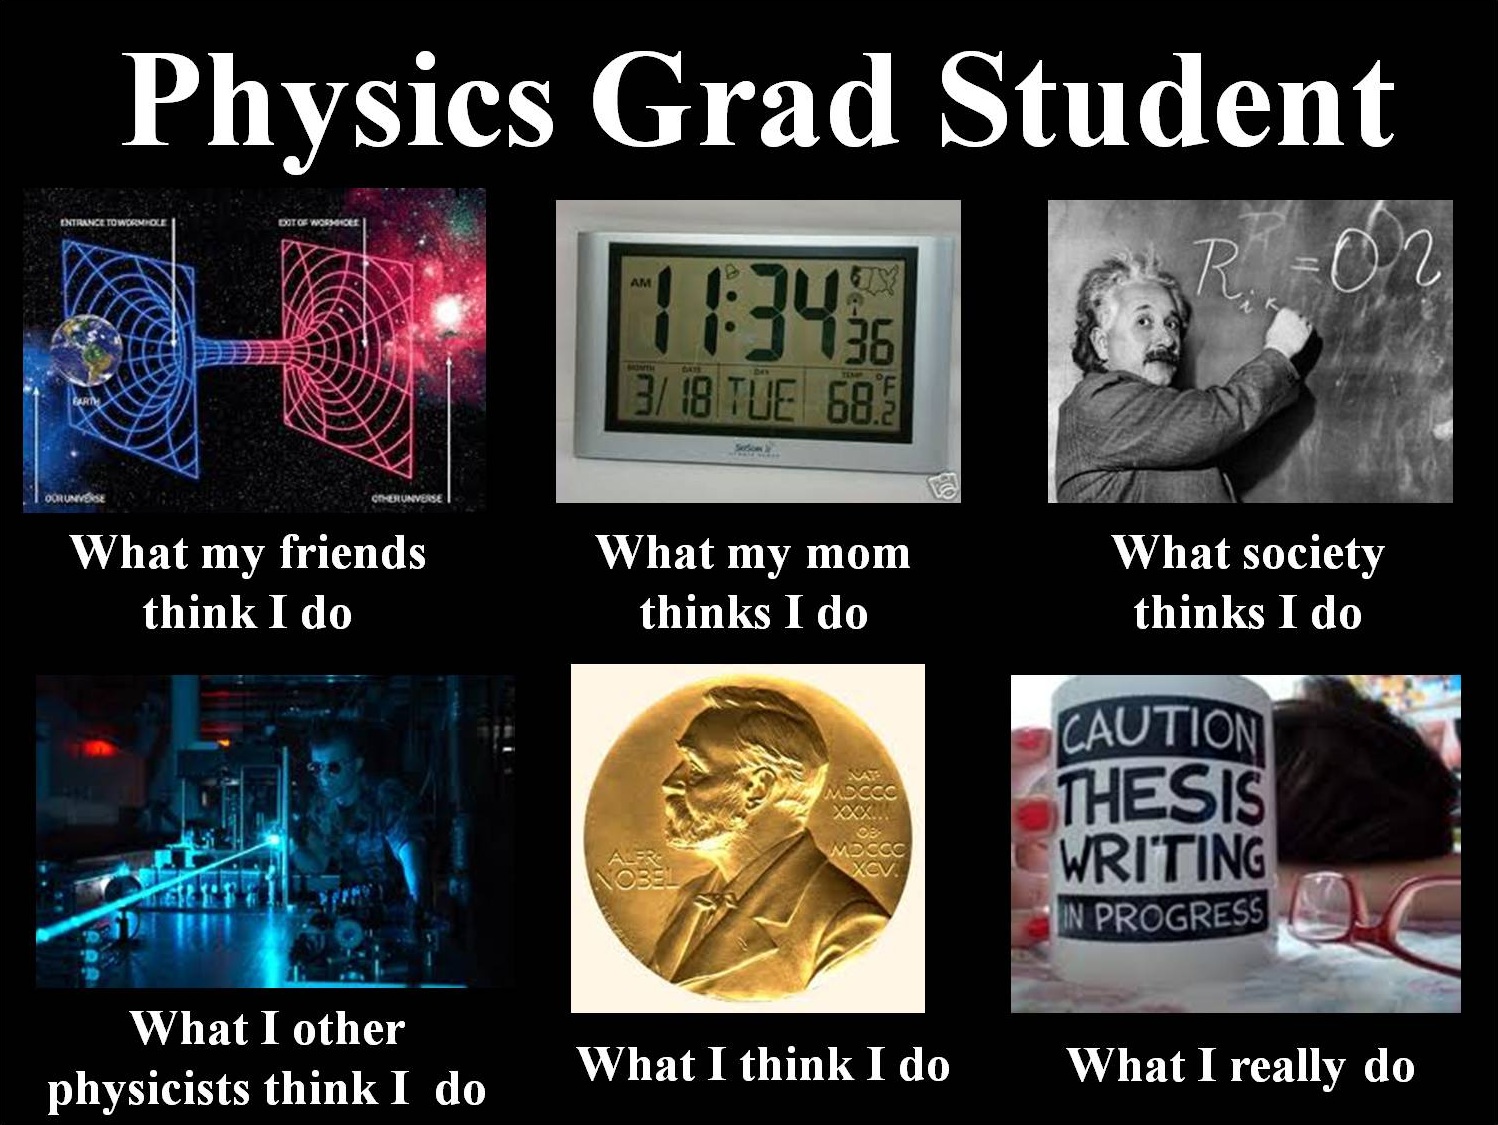 Shortest phd thesis in physics